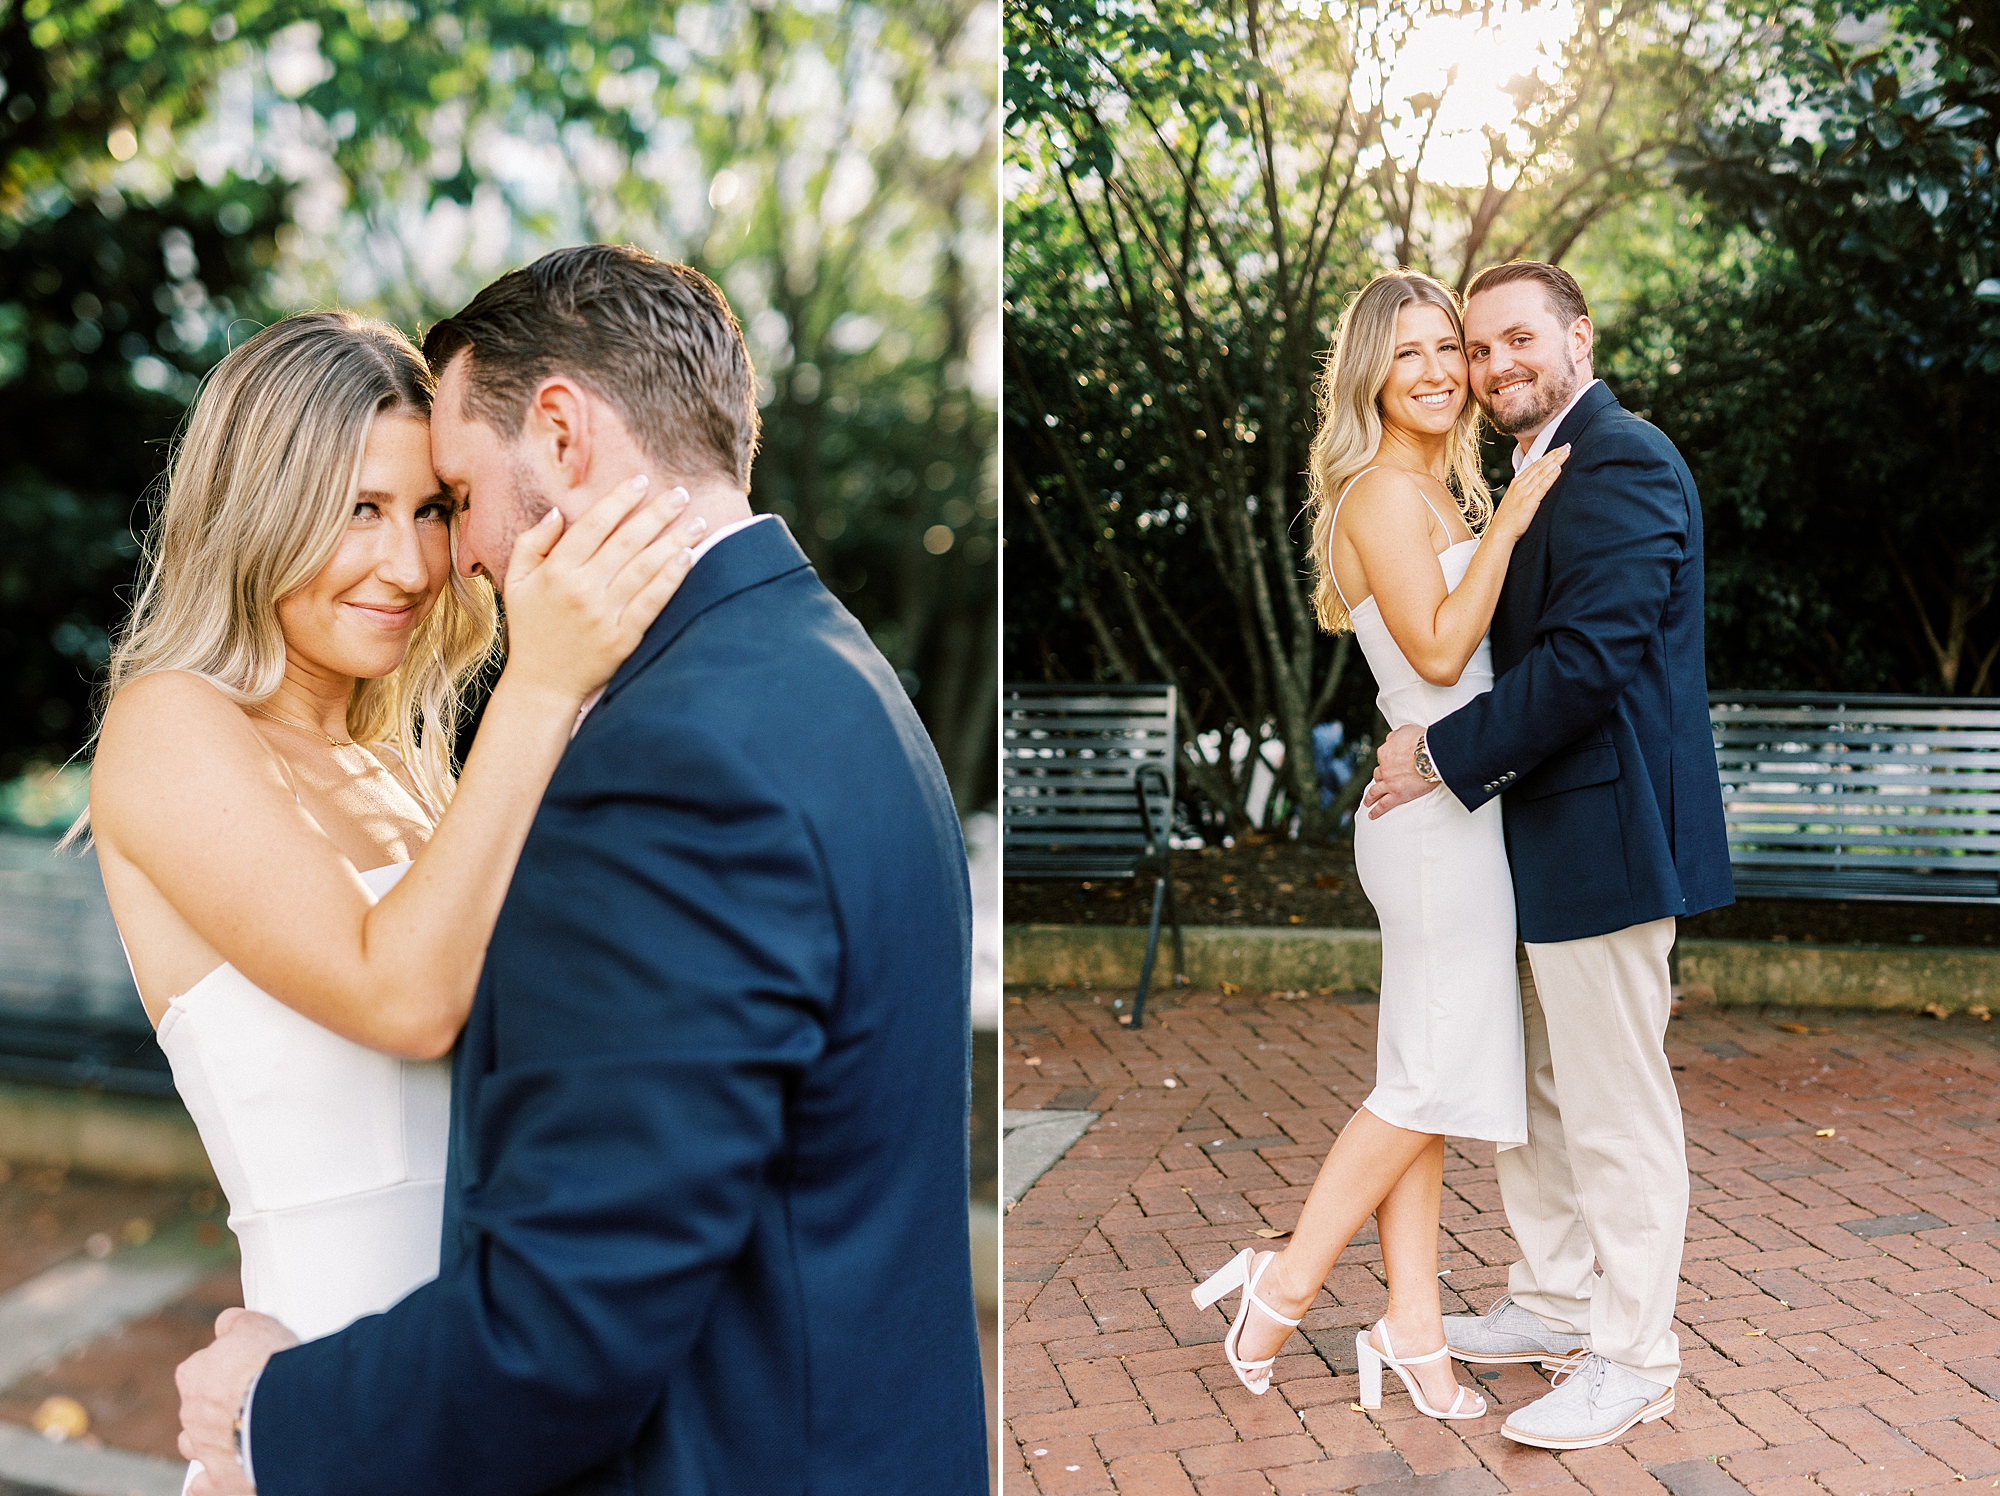 Romare Bearden Park engagement session for couple in white dresses and navy suit 